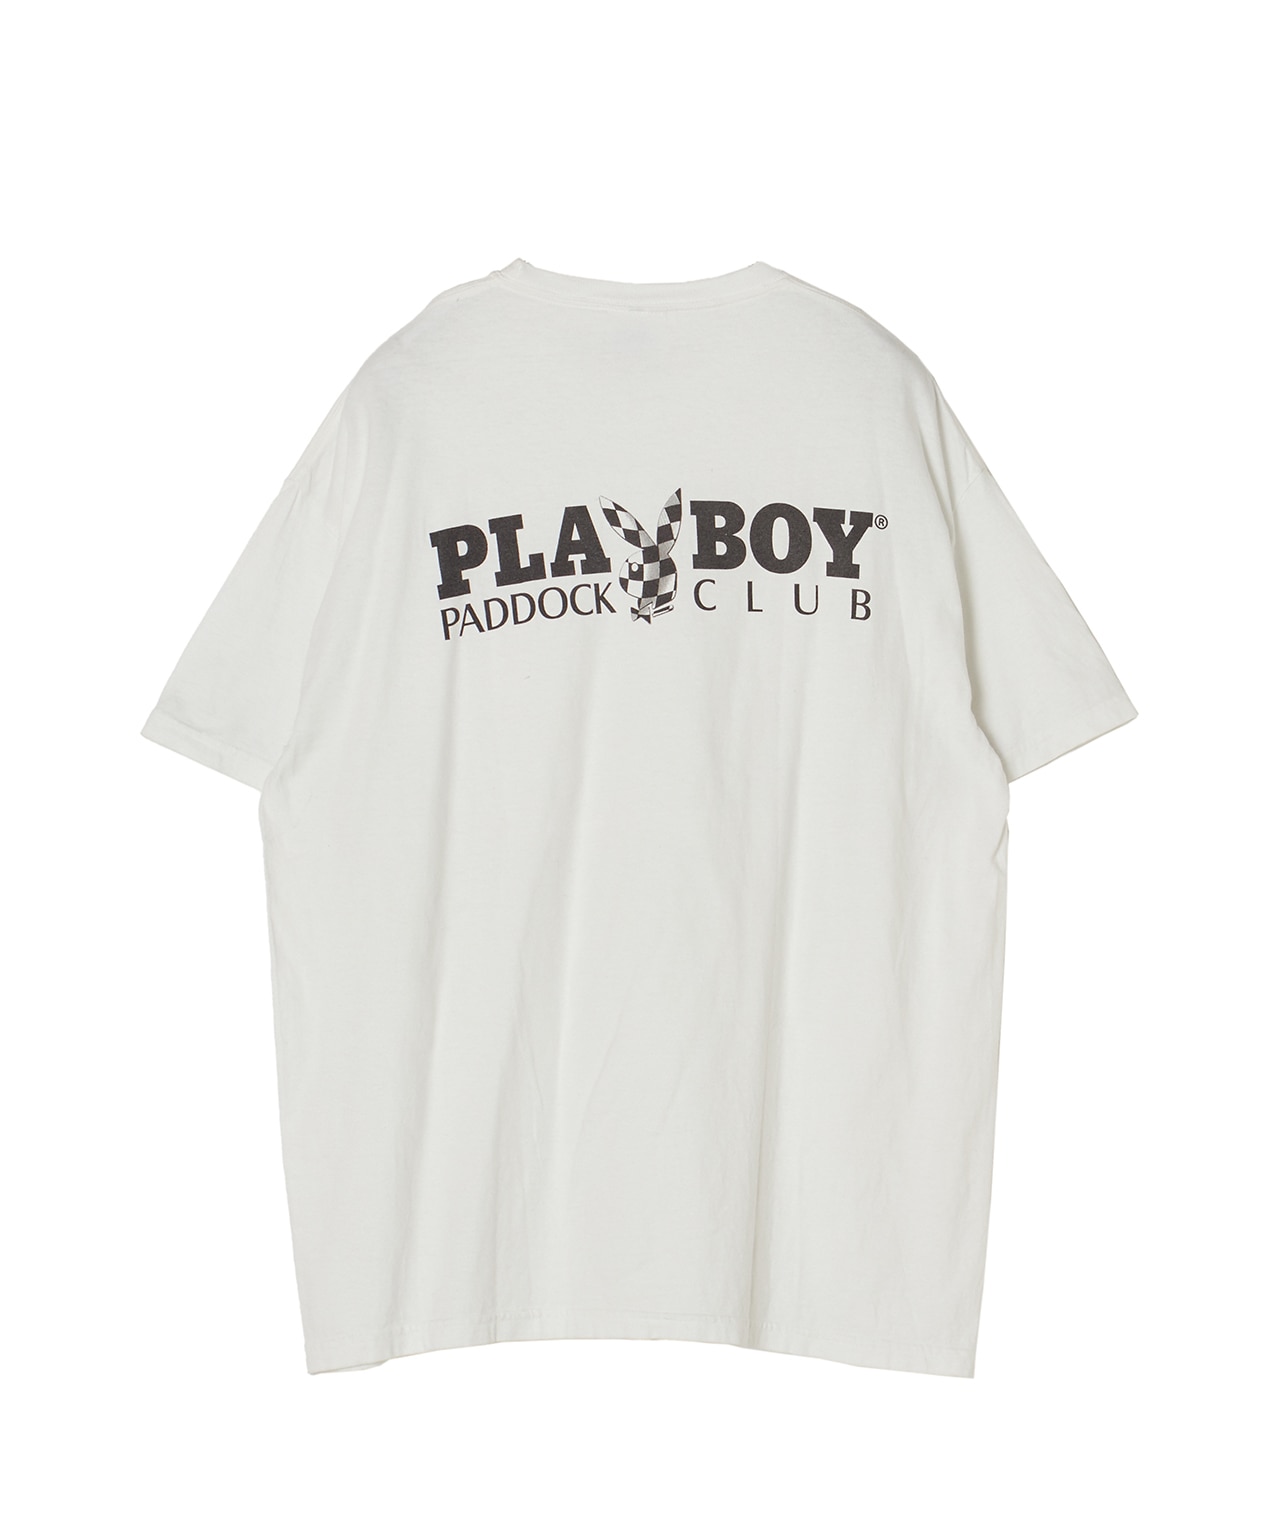 USED/NOS(ONE WASH) 00's- PLAYBOY T SHIRT 詳細画像 ホワイト 2